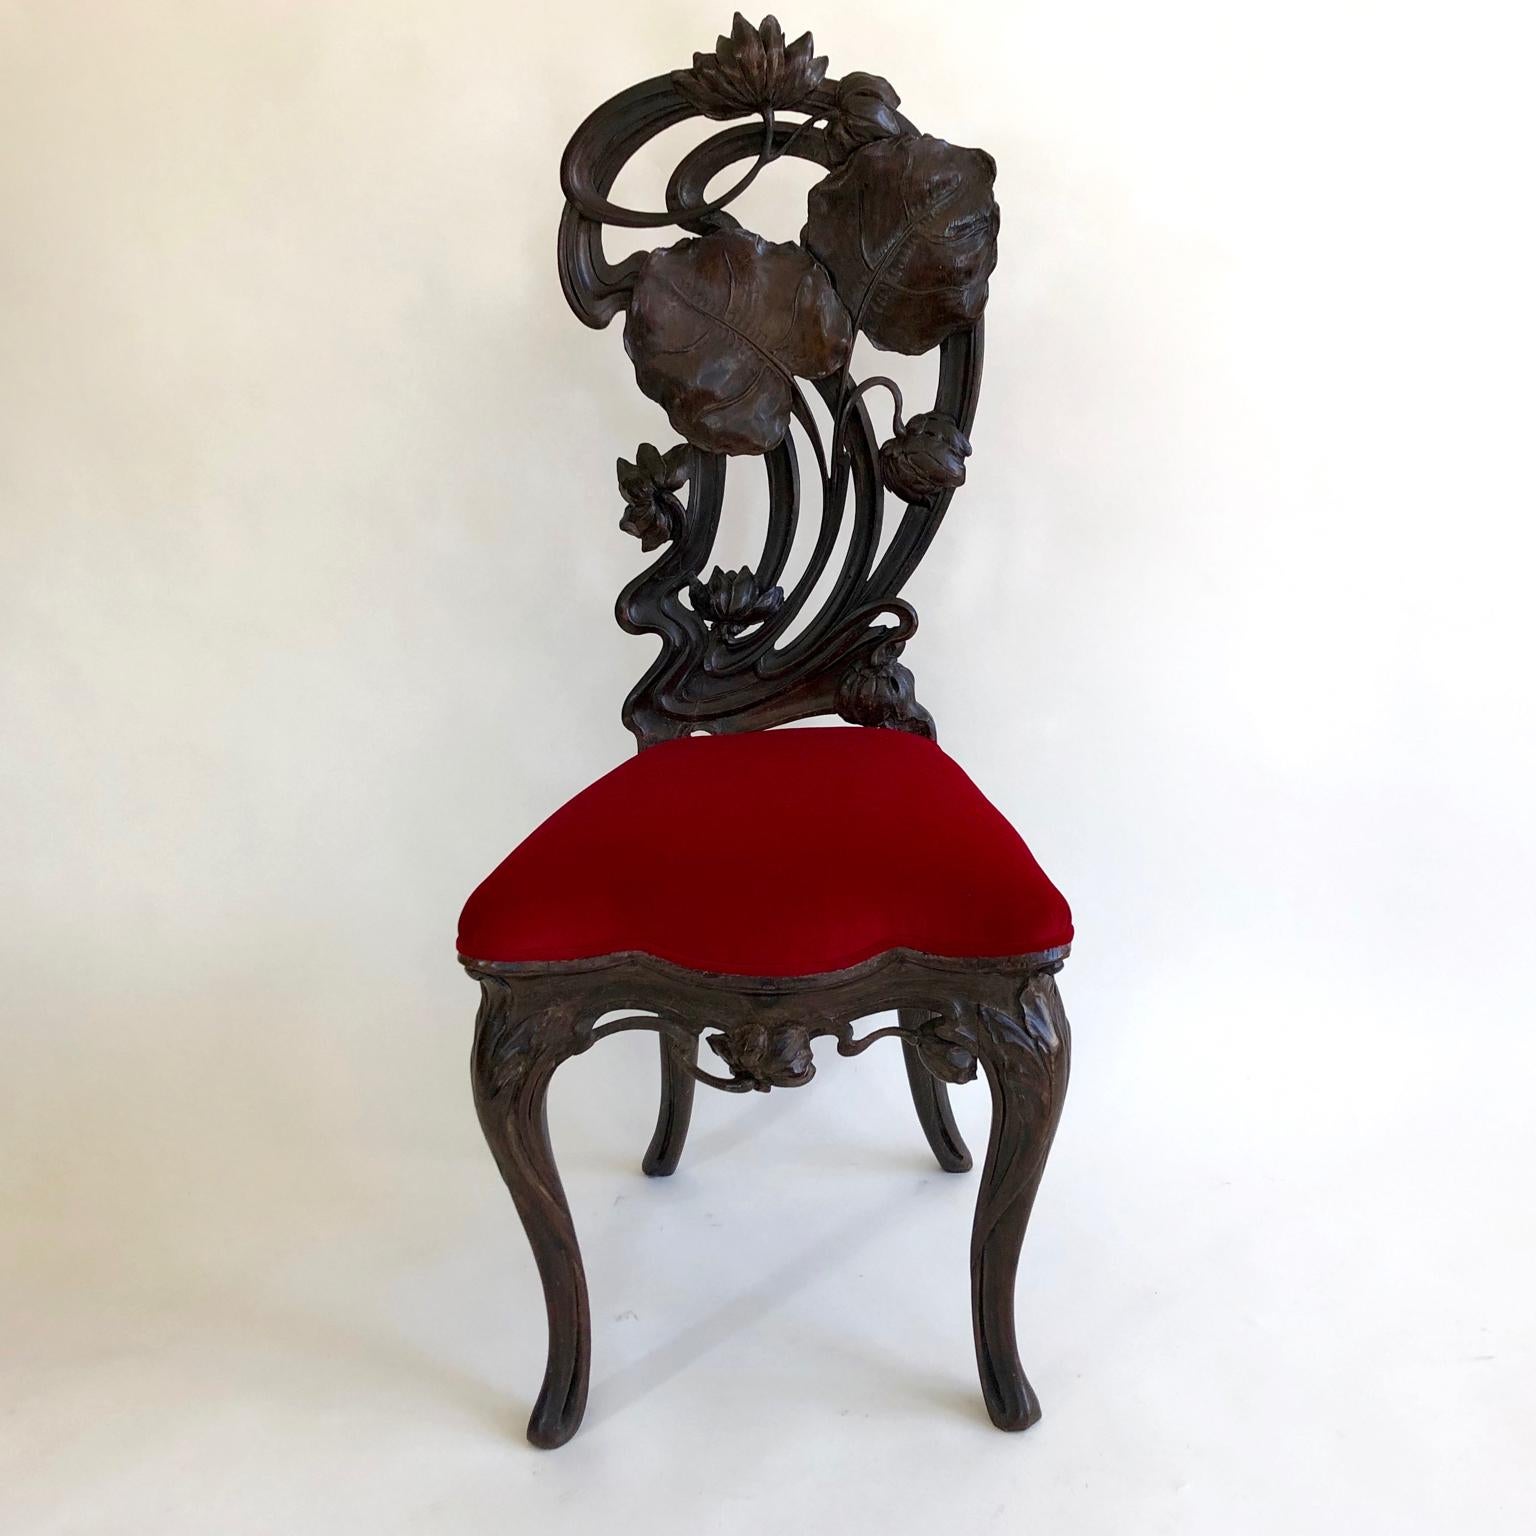 European Art Nouveau hand carved hall chair with a red velour or velvet seat.